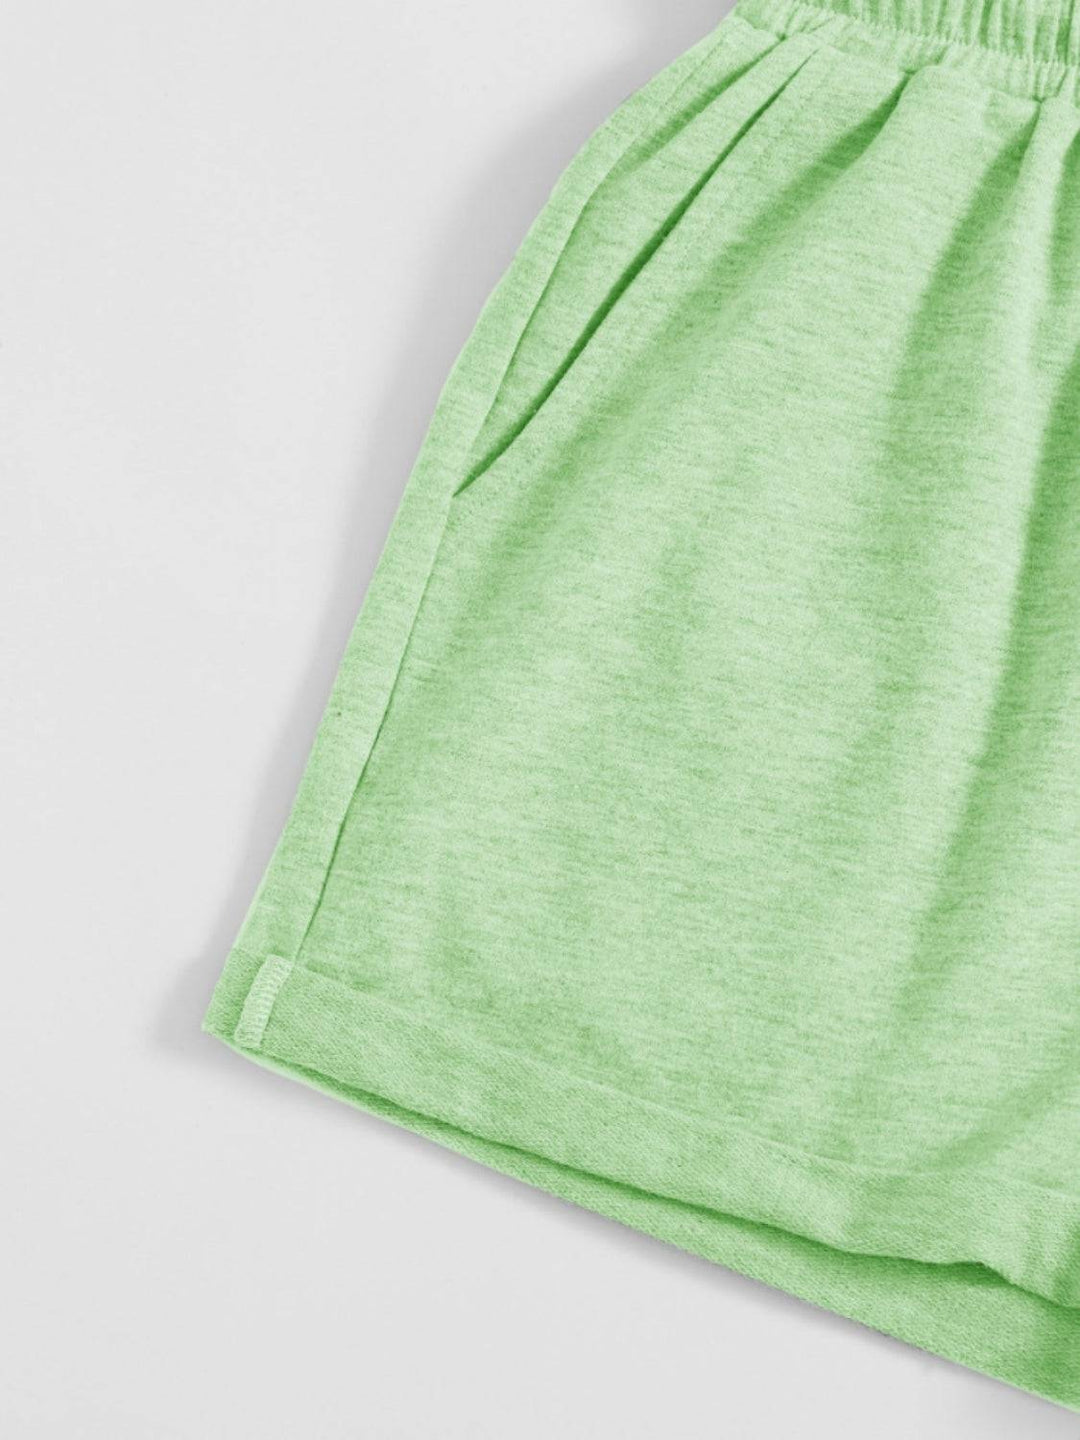 a close up of a green shorts on a white surface